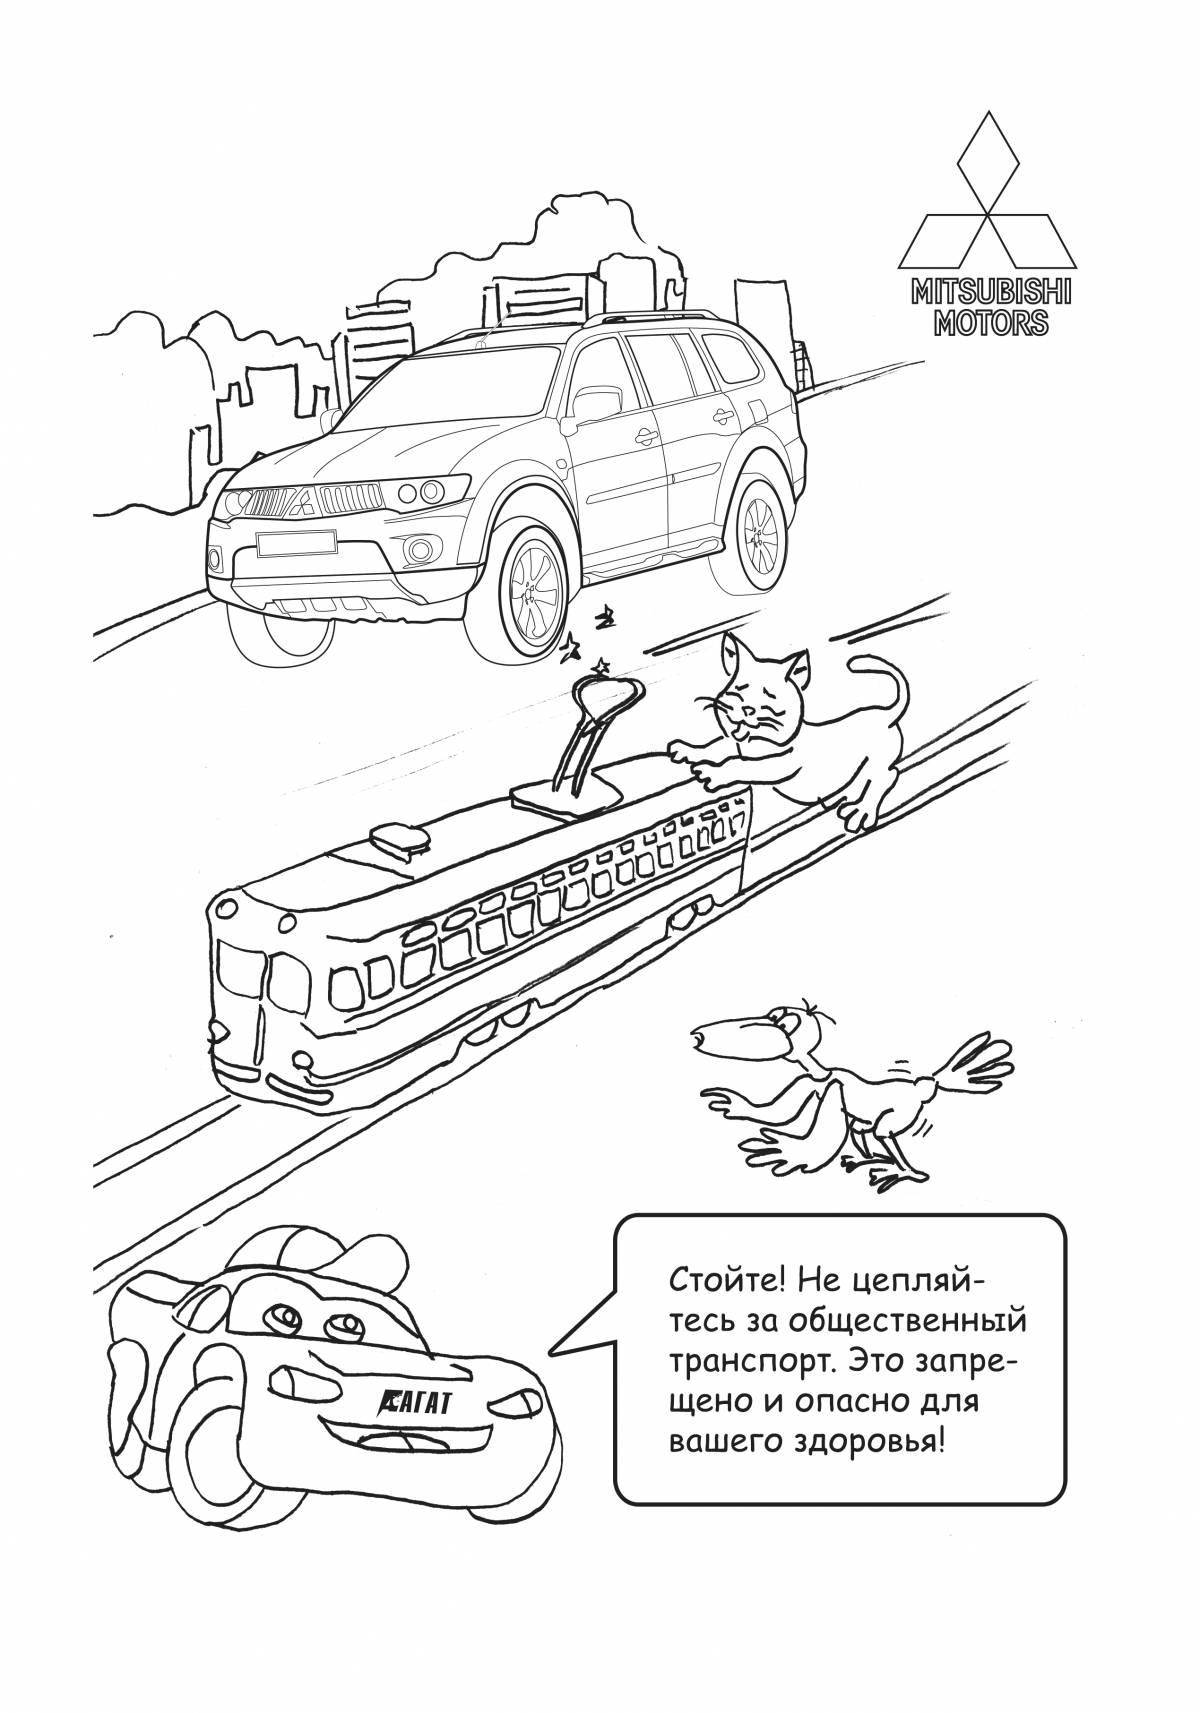 Wonderful winter safety rules coloring page